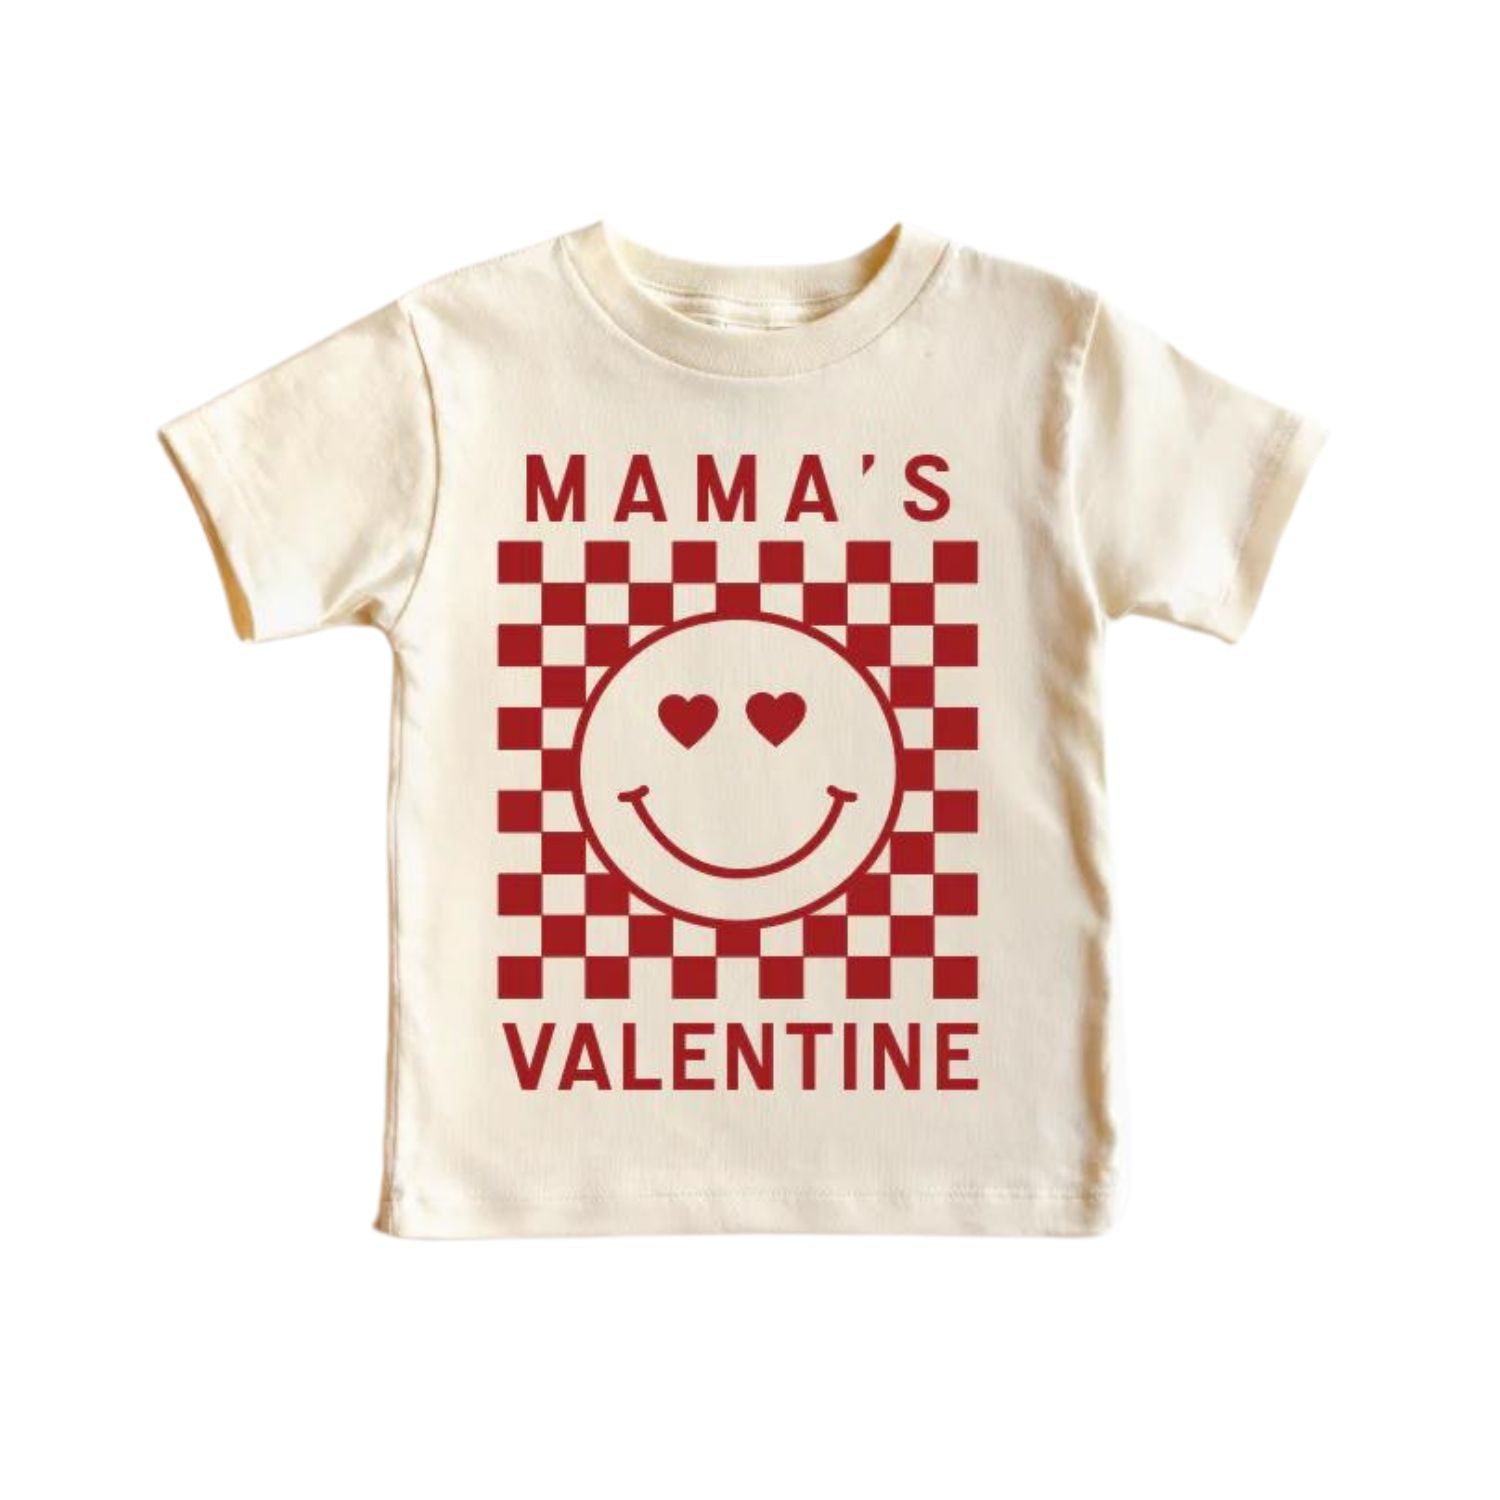 Saved By Grace Co Checkered Tee - Mama's Valentine - Natural